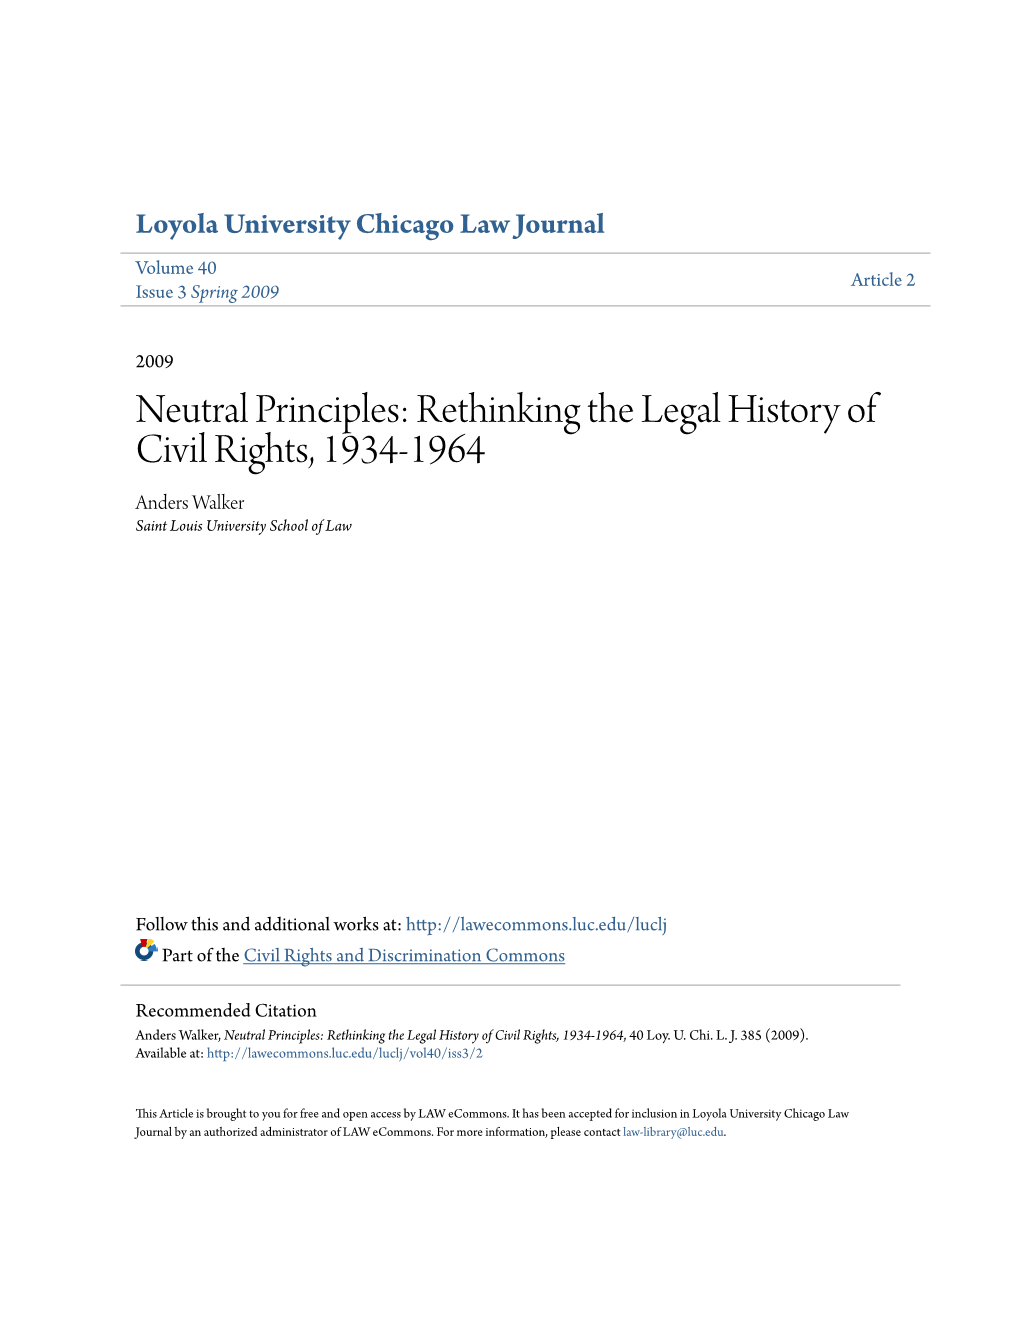 Neutral Principles: Rethinking the Legal History of Civil Rights, 1934-1964 Anders Walker Saint Louis University School of Law